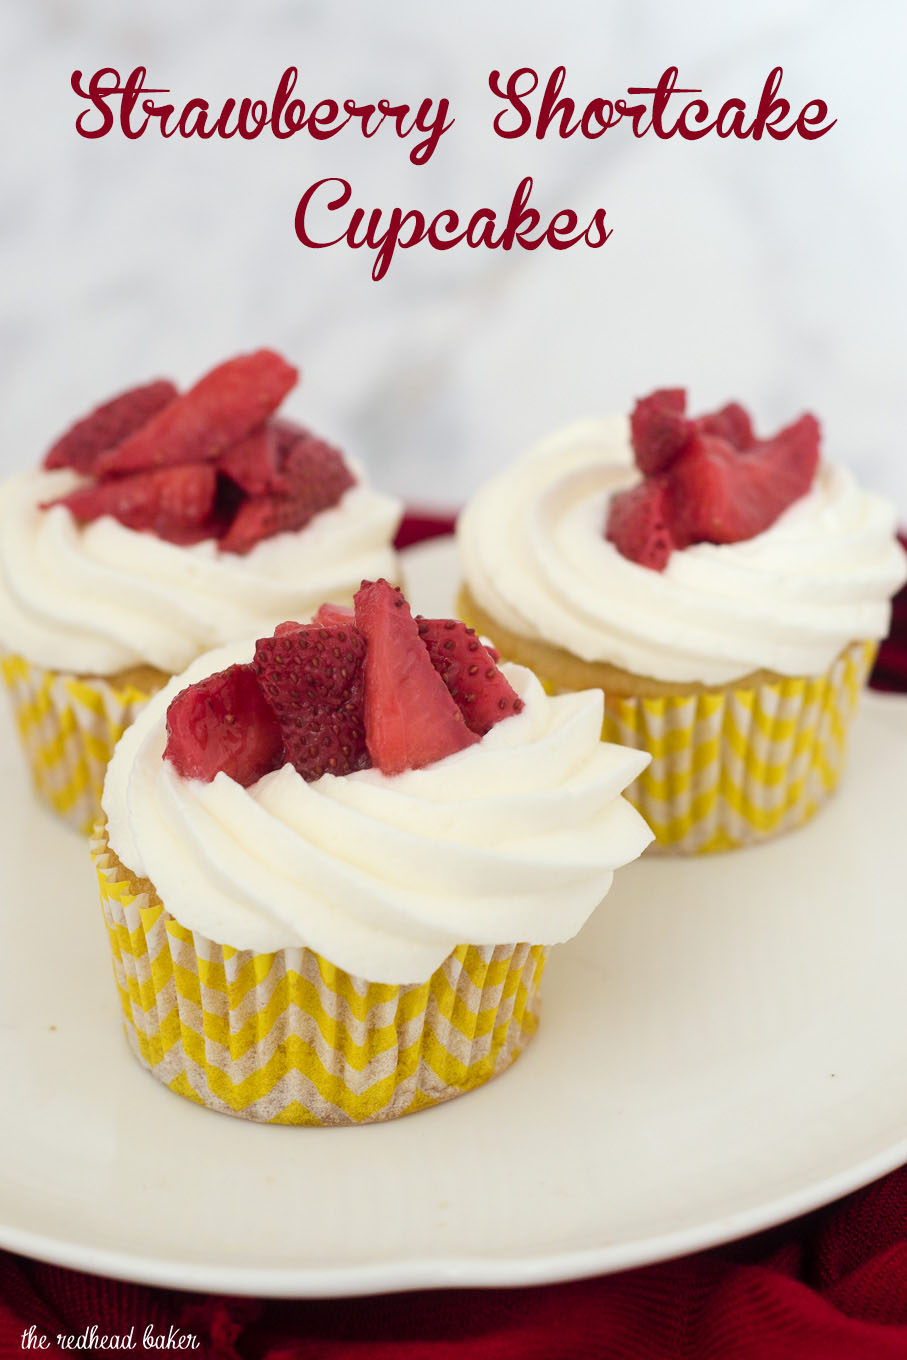 Strawberry shortcake cupcakes are an easy dessert that kids and adults alike will enjoy. Vanilla cupcakes are topped with whipped cream and strawberries. 